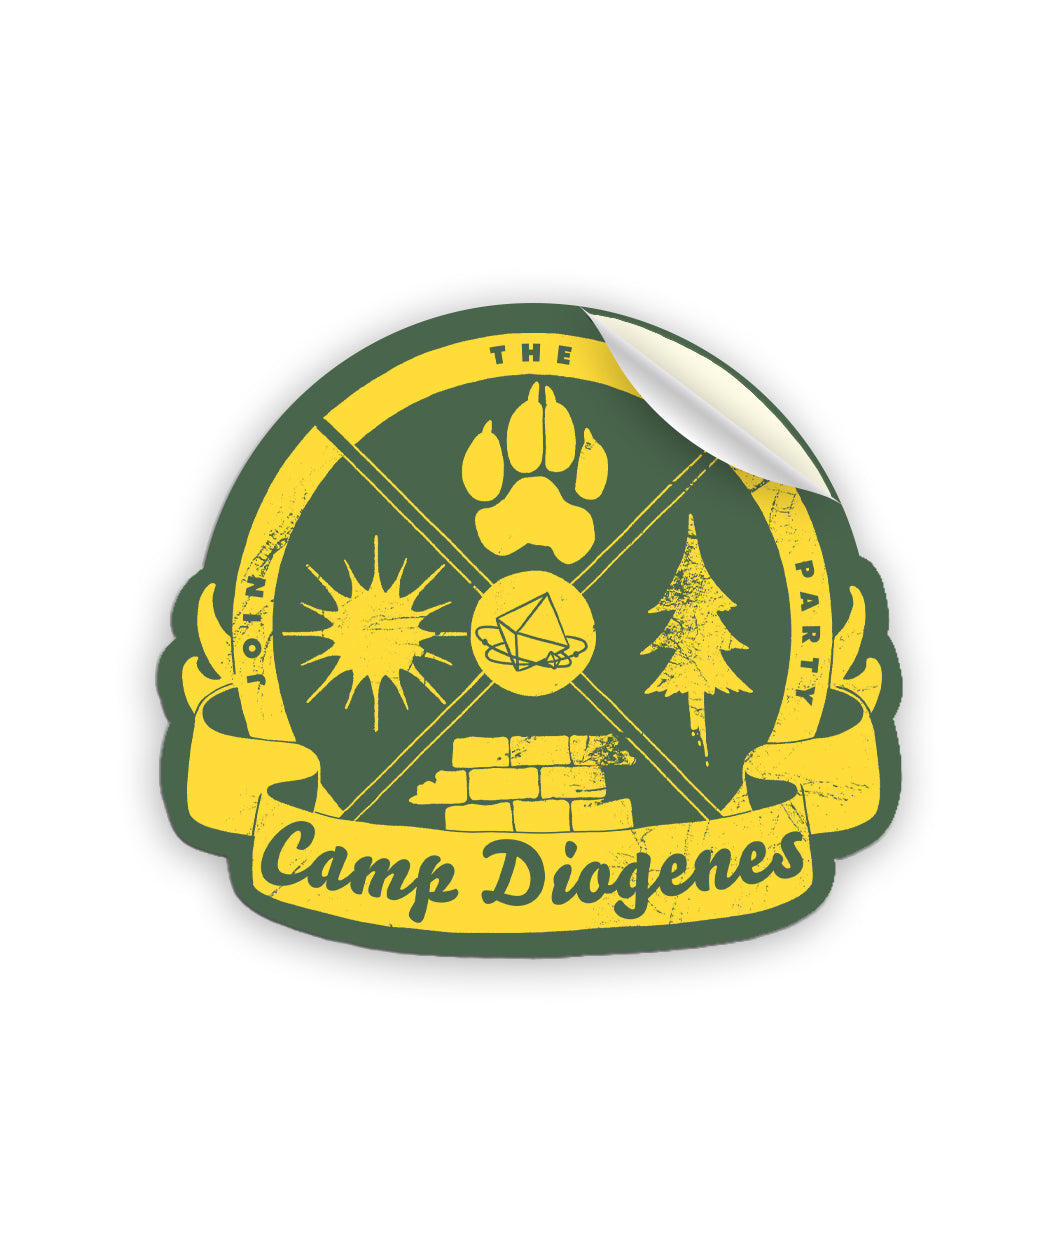 A sticker of a yellow crest on a dark green background that reads "Camp Diogenes" and has a paw print, tree, sun and wall icons as well as the Join the Party logo in the center.